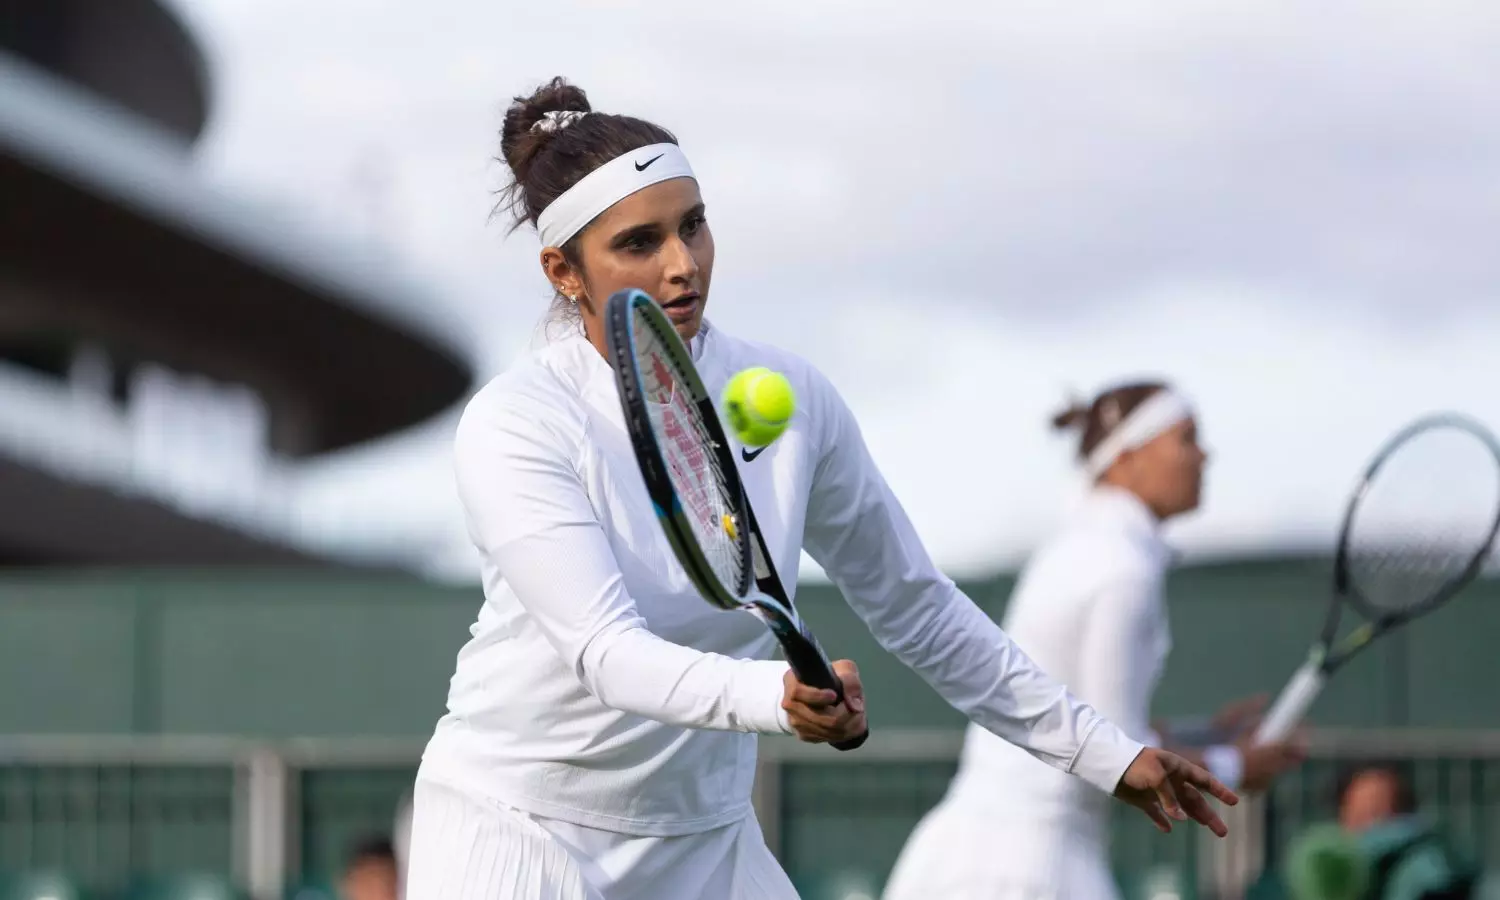 Wimbledon 2022: Sania Mirza bows out of Women's Doubles one last time